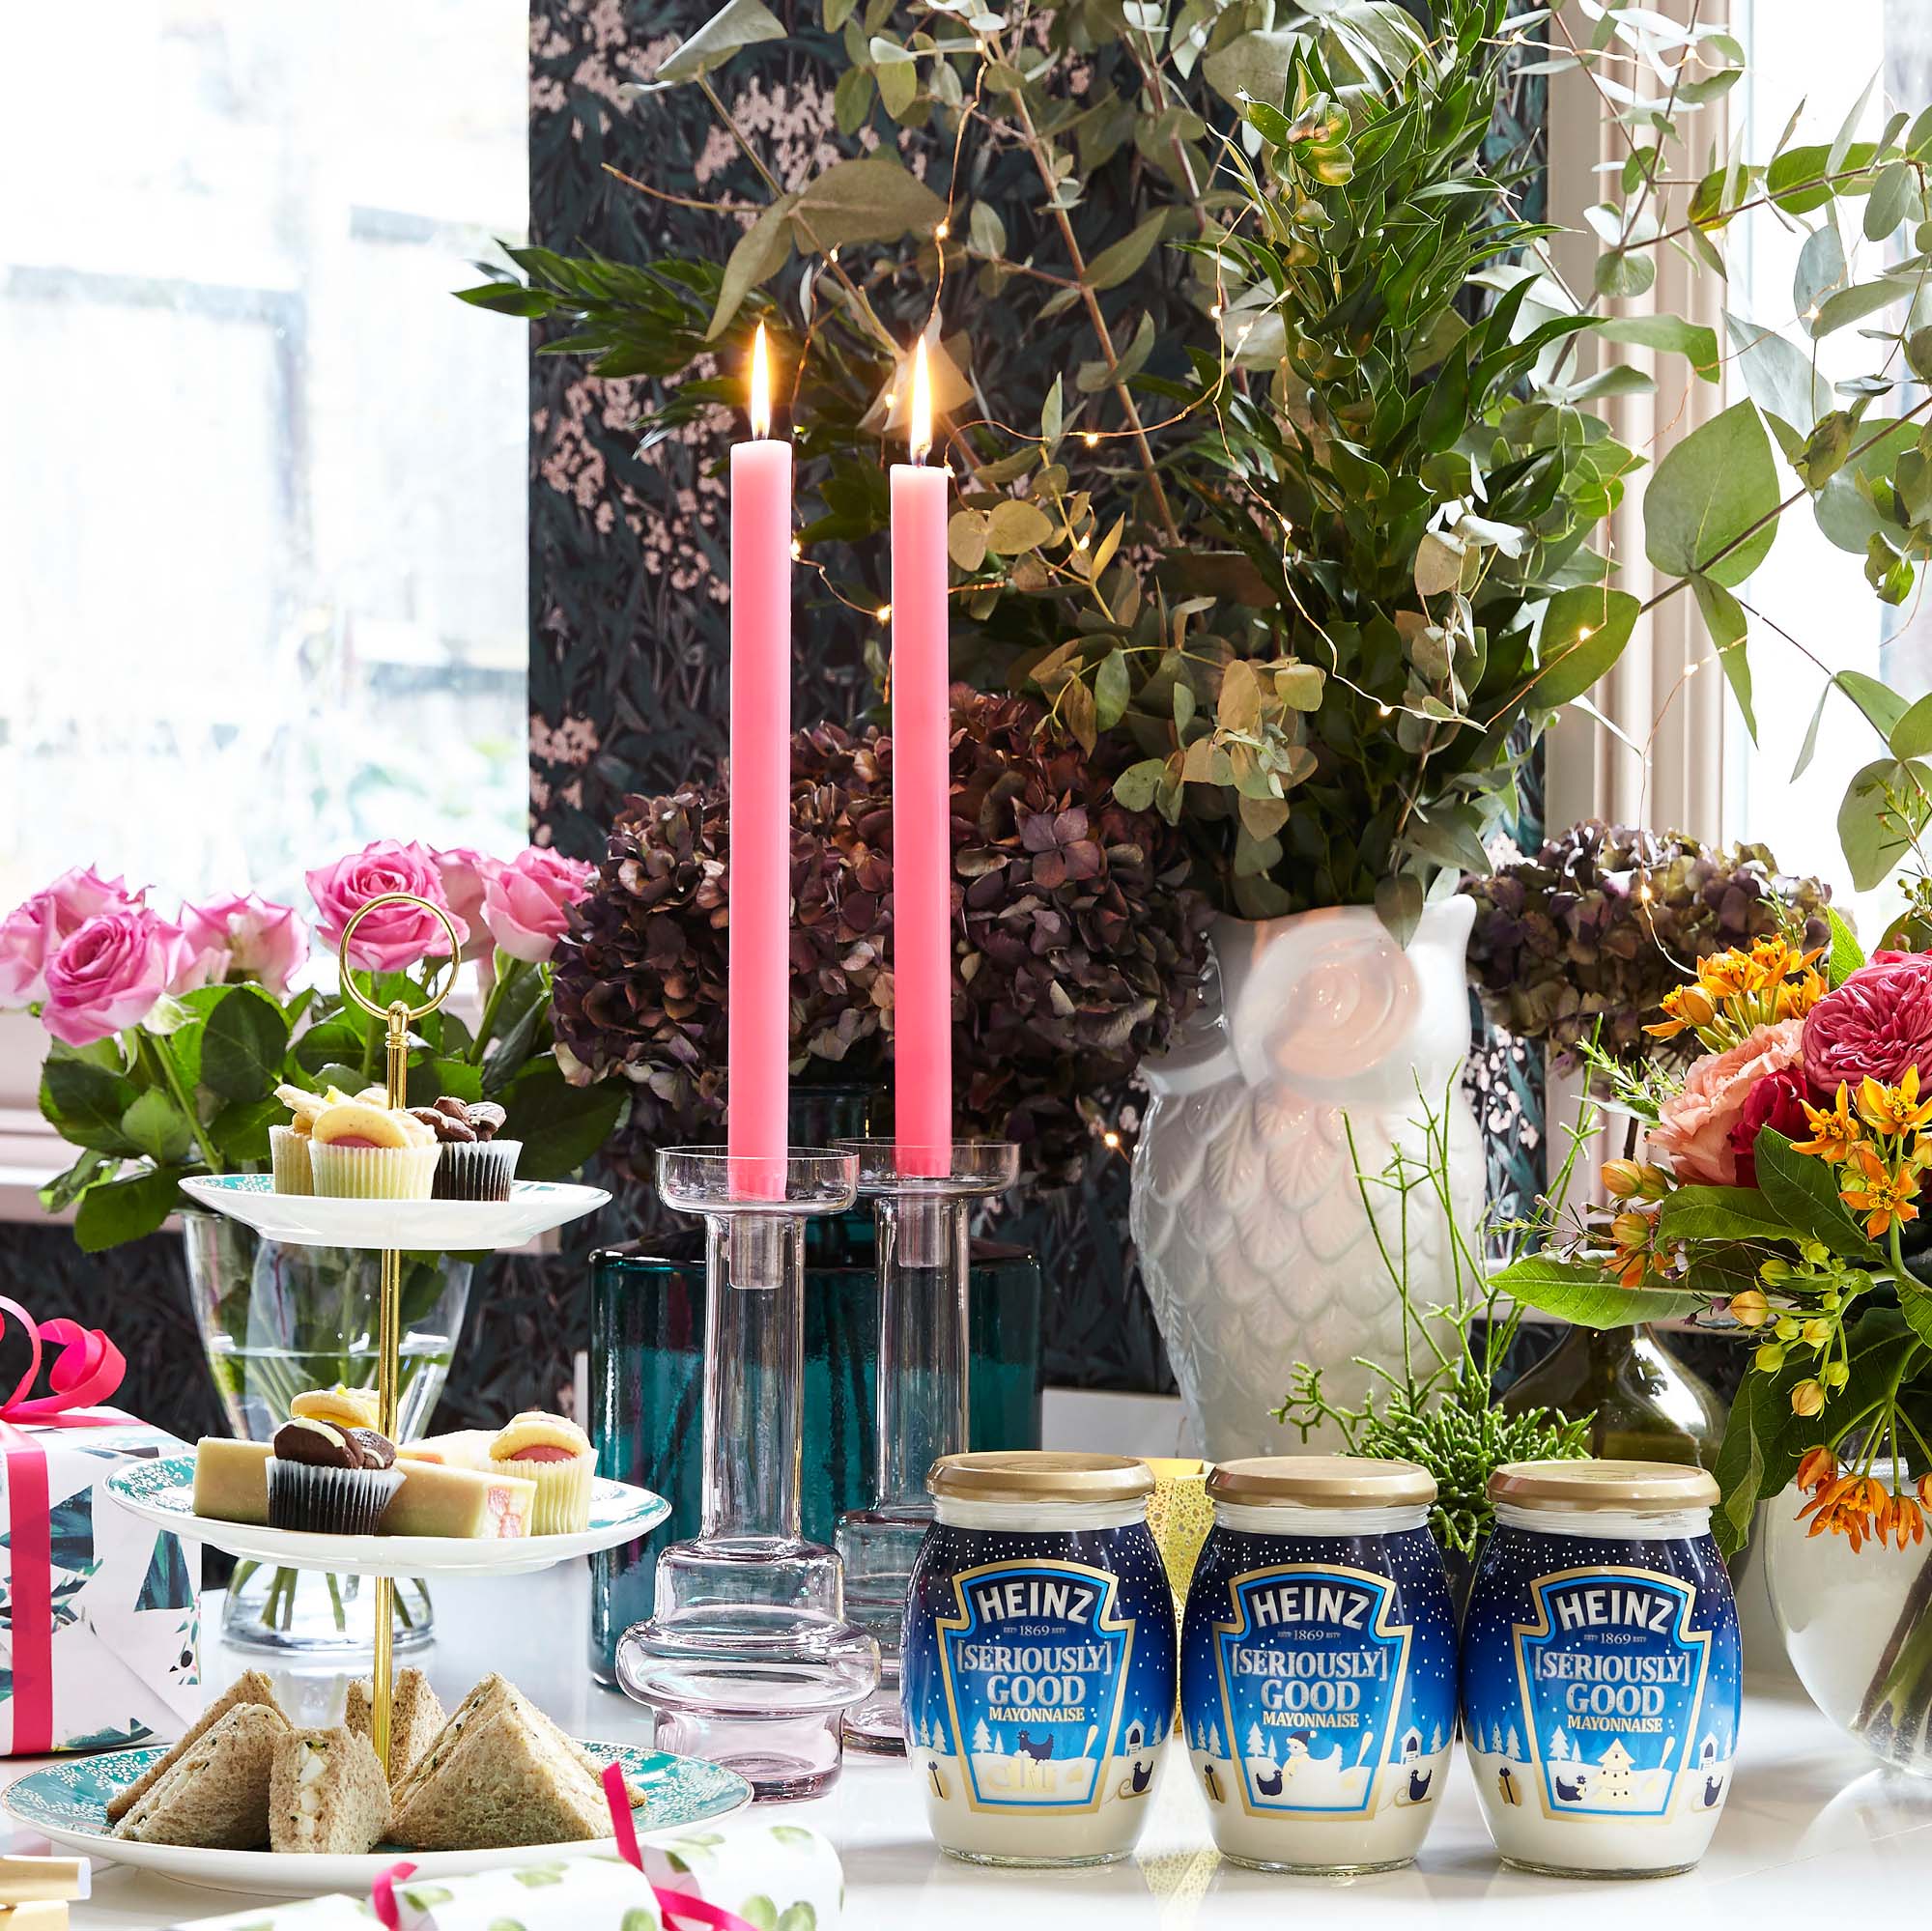 Heinz Seriously Good Mayonnaise Christmas edition on the Boxing Day afternoon tea table